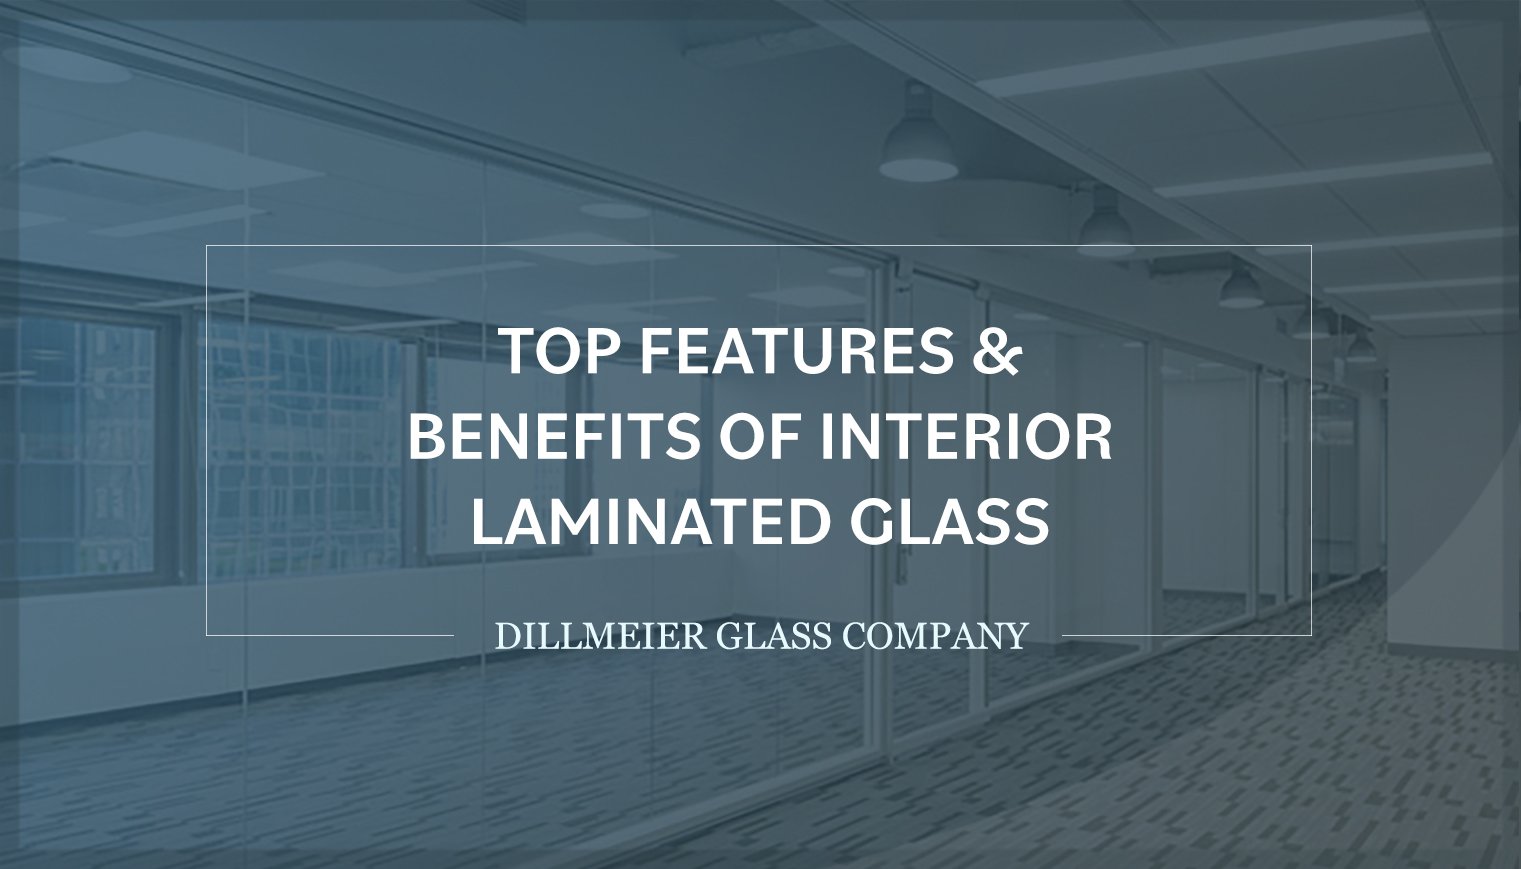 Beautiful office with glass walls and text - Top Features & Benefits of Interior Laminated Glass